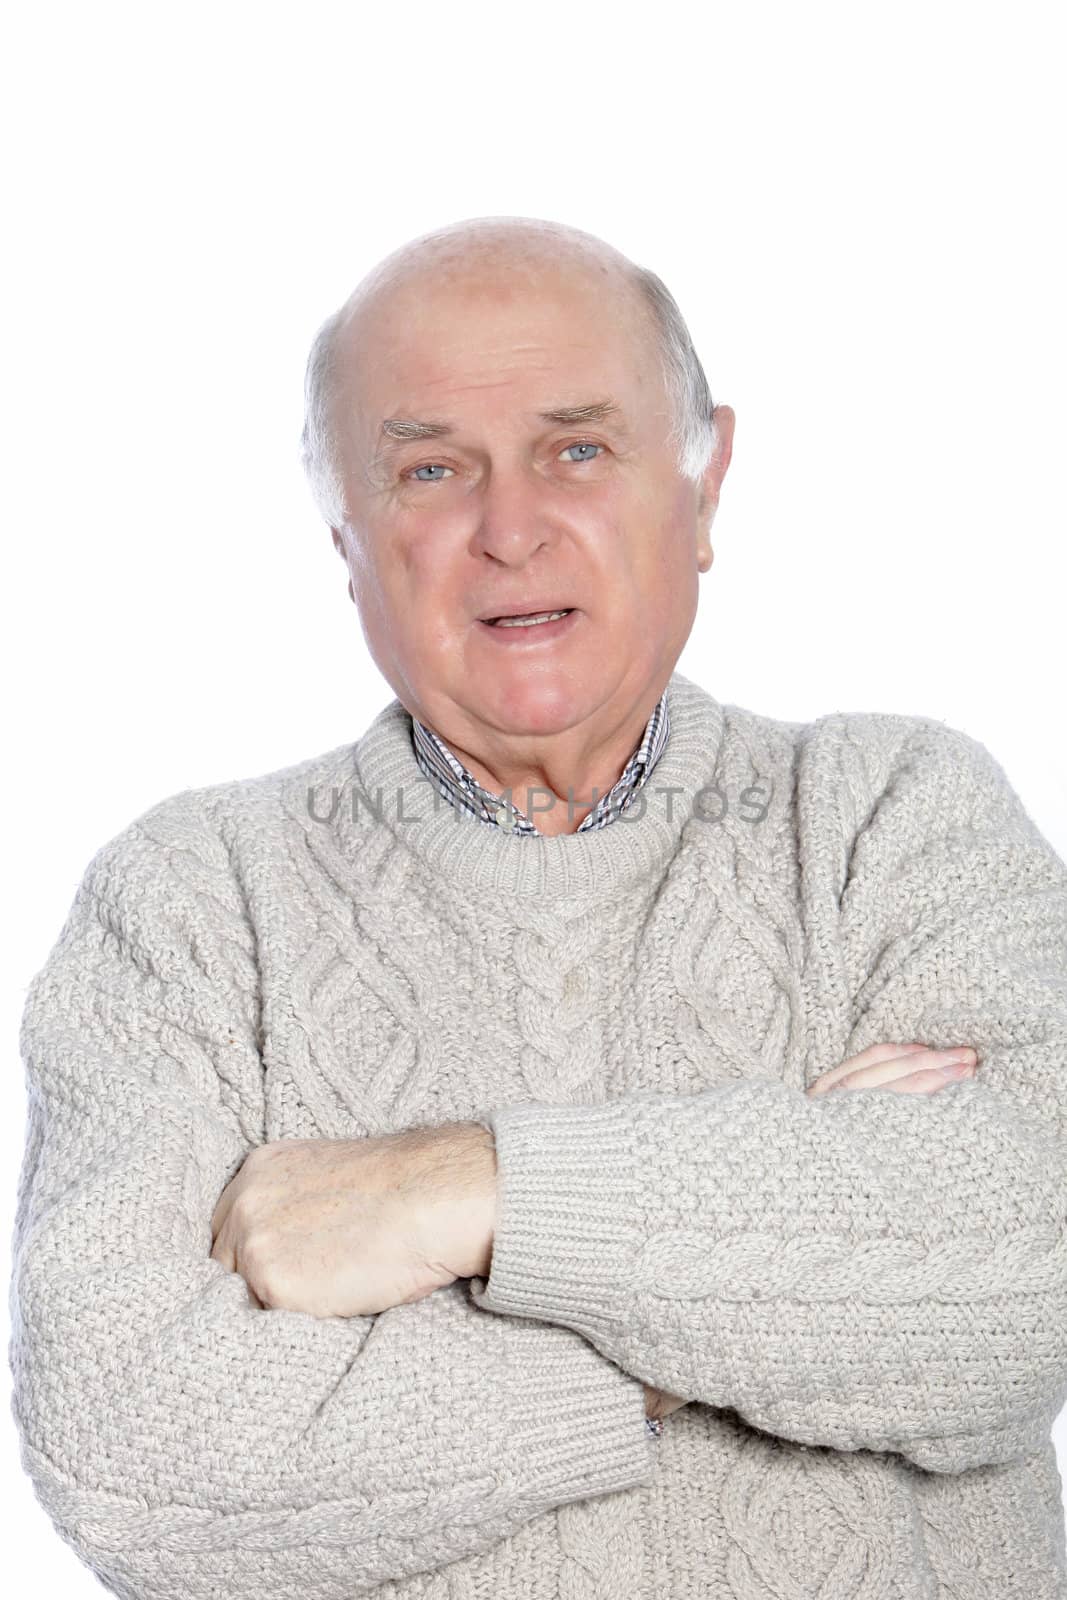 Portrait of mature, balding man, dressed in a knit, cable sweater